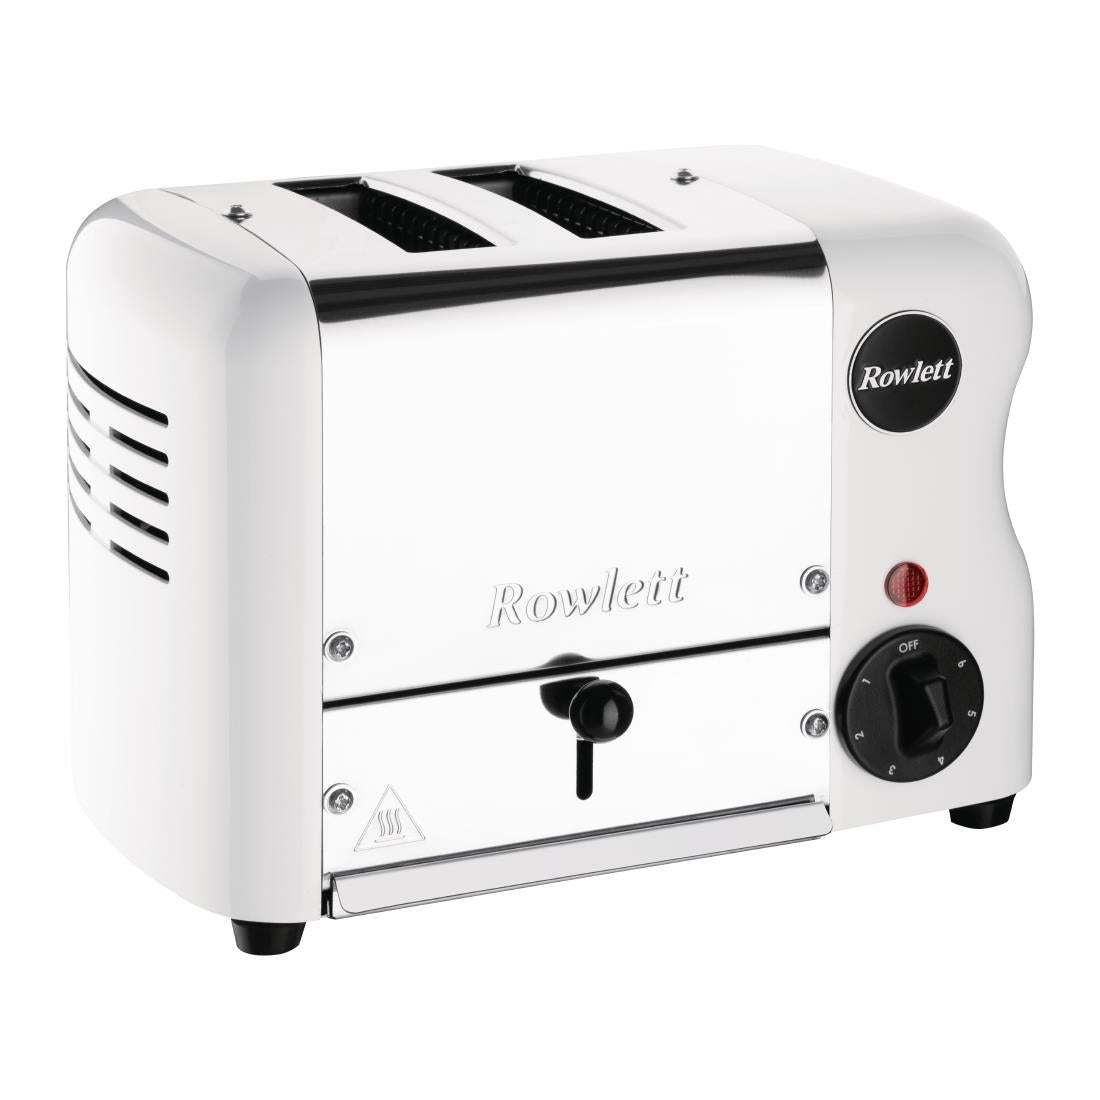 CH178 Rowlett Esprit 2 Slot Toaster White w/ 2 Additional Elements & Sandwich Cage JD Catering Equipment Solutions Ltd